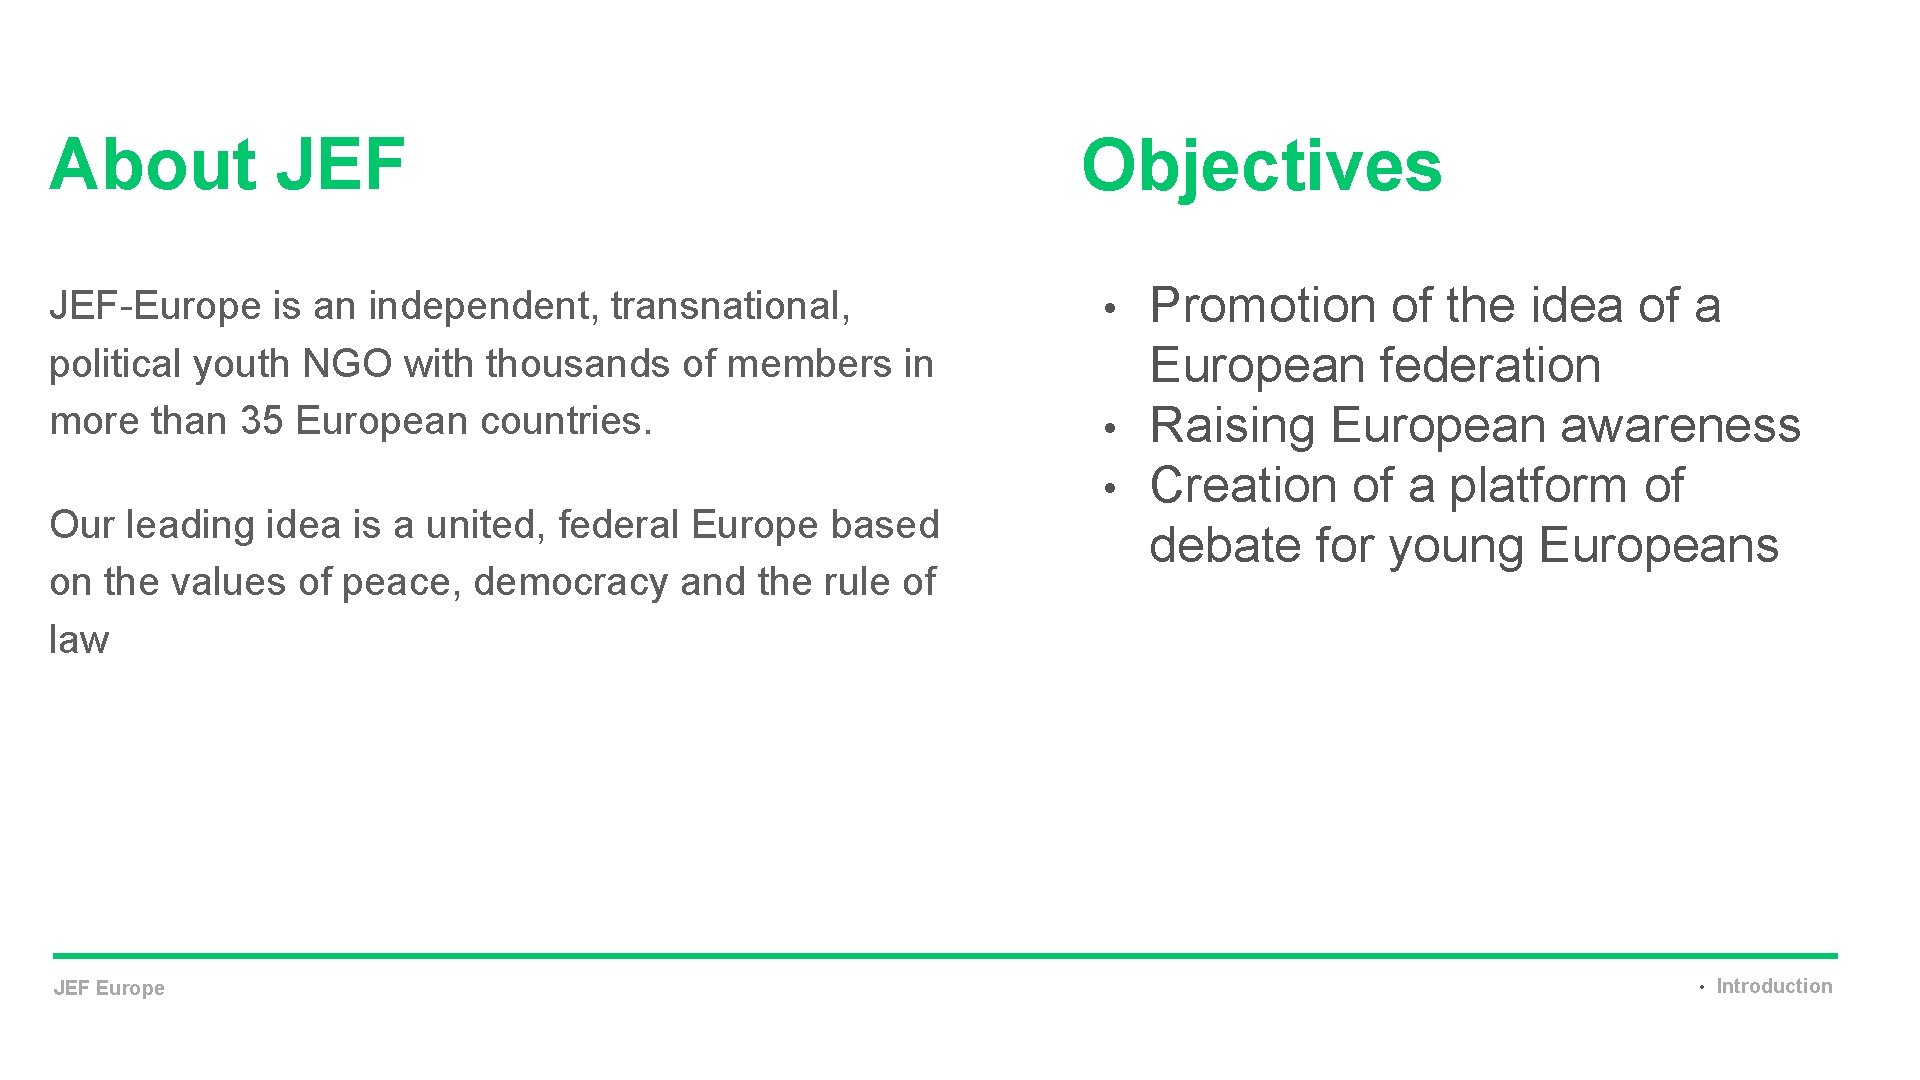 About JEF-Europe is an independent, transnational, political youth NGO with thousands of members in